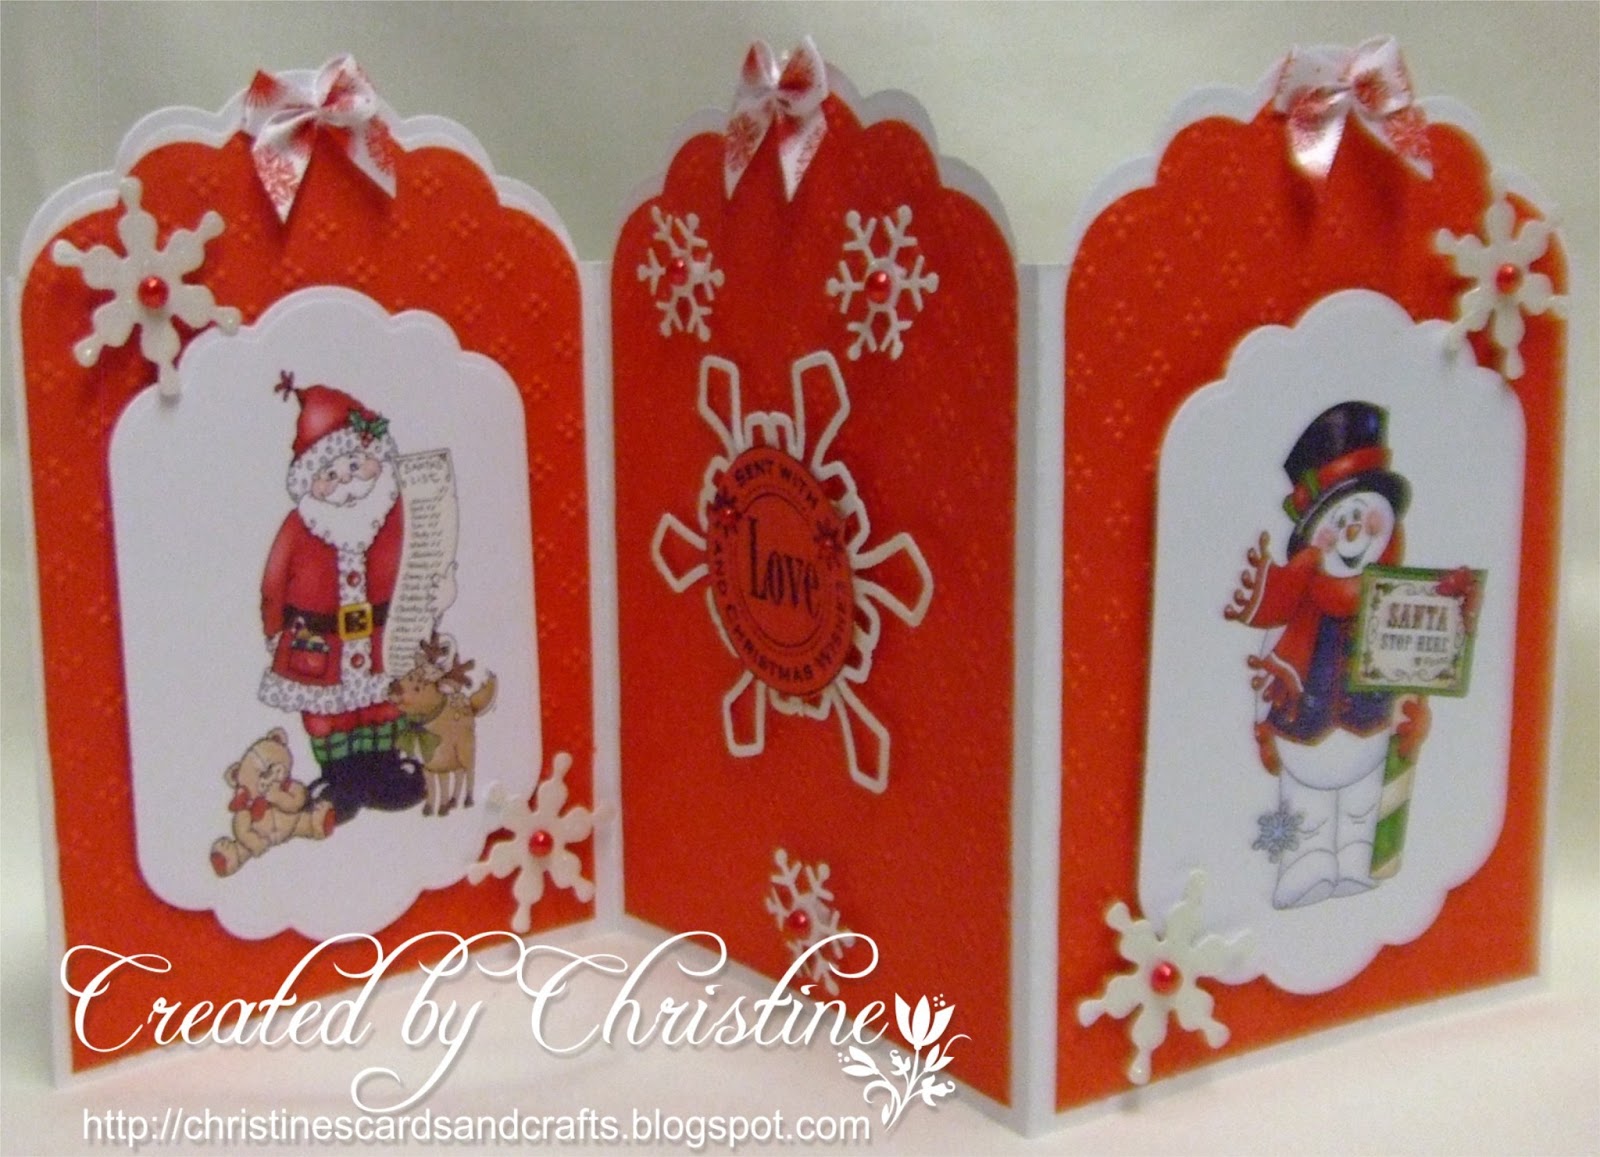 christine-s-cards-and-crafts-tri-fold-christmas-card